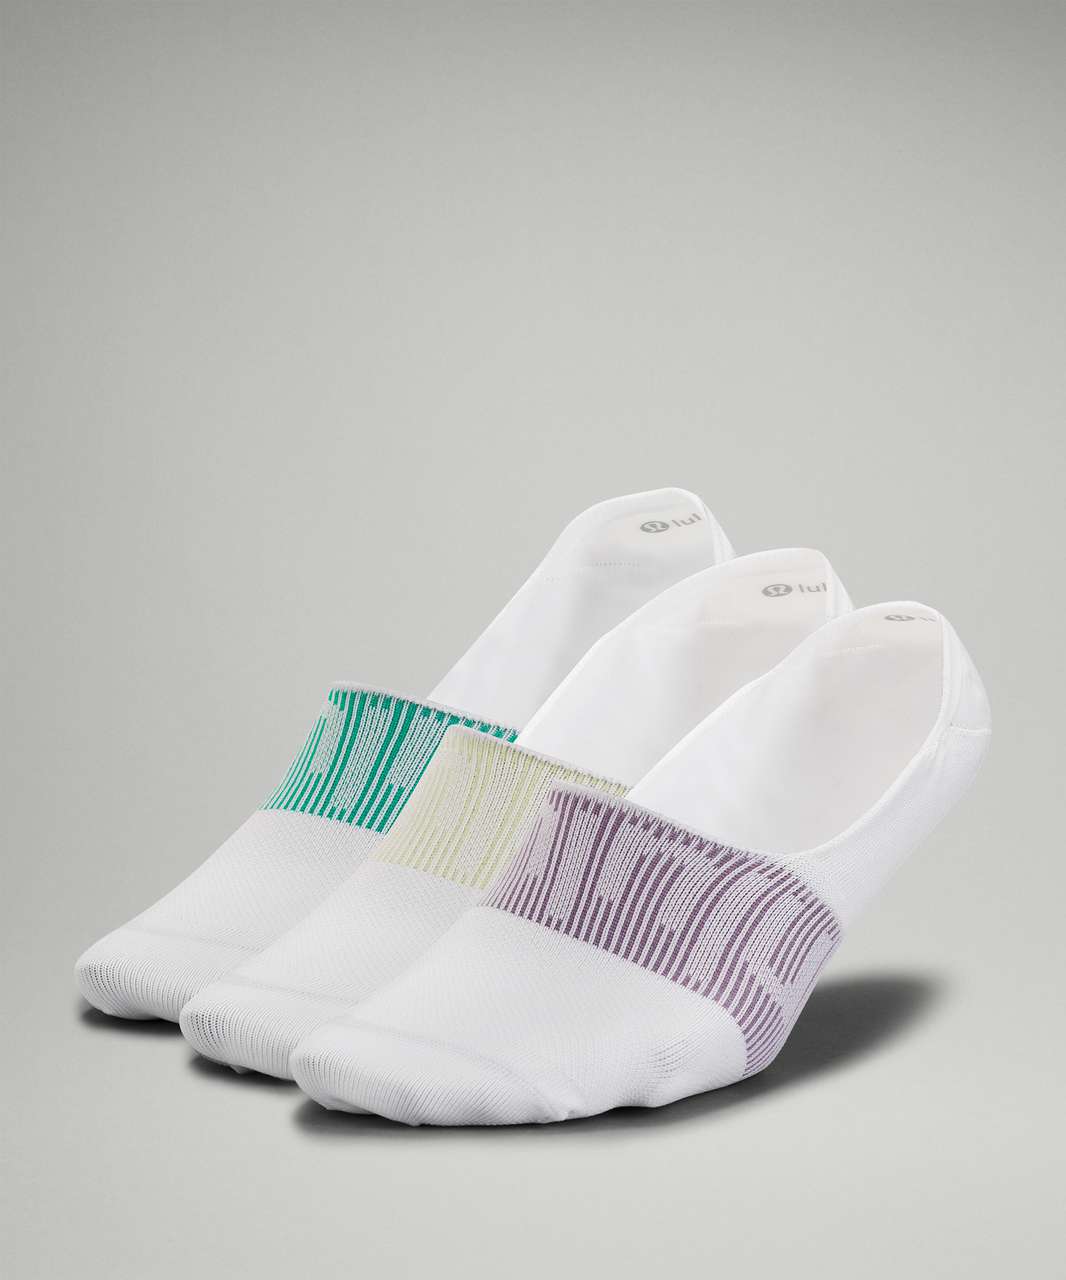 Lululemon Daily Stride No Show Sock *3 Pack - White / Crispin Green / Maldives Green